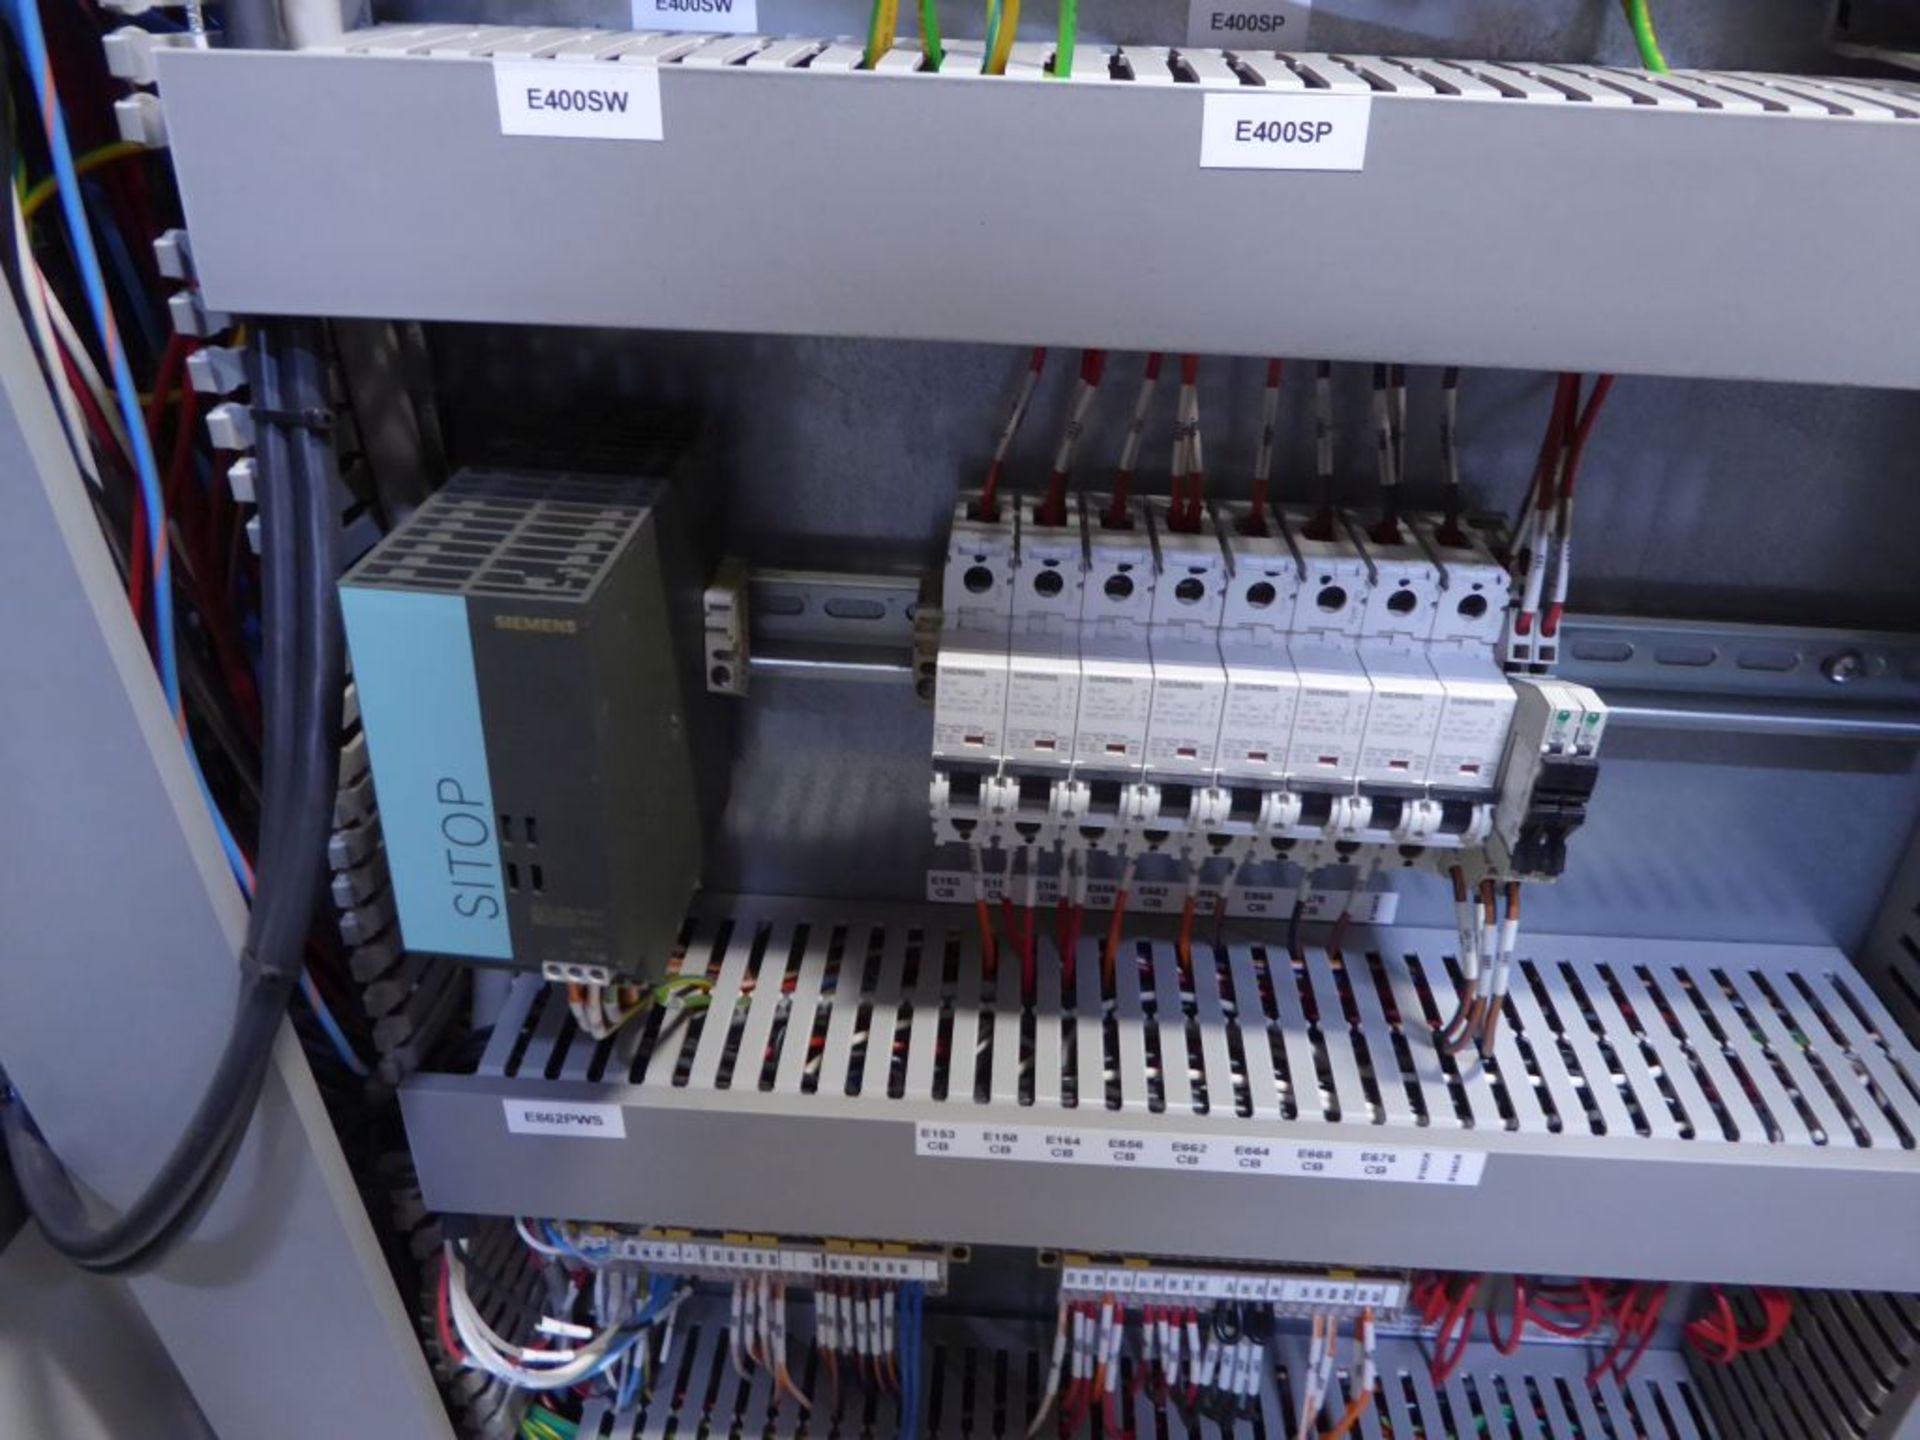 Control Panel with (2) Allen Bradley Powerflex 700 Drives - Image 9 of 25